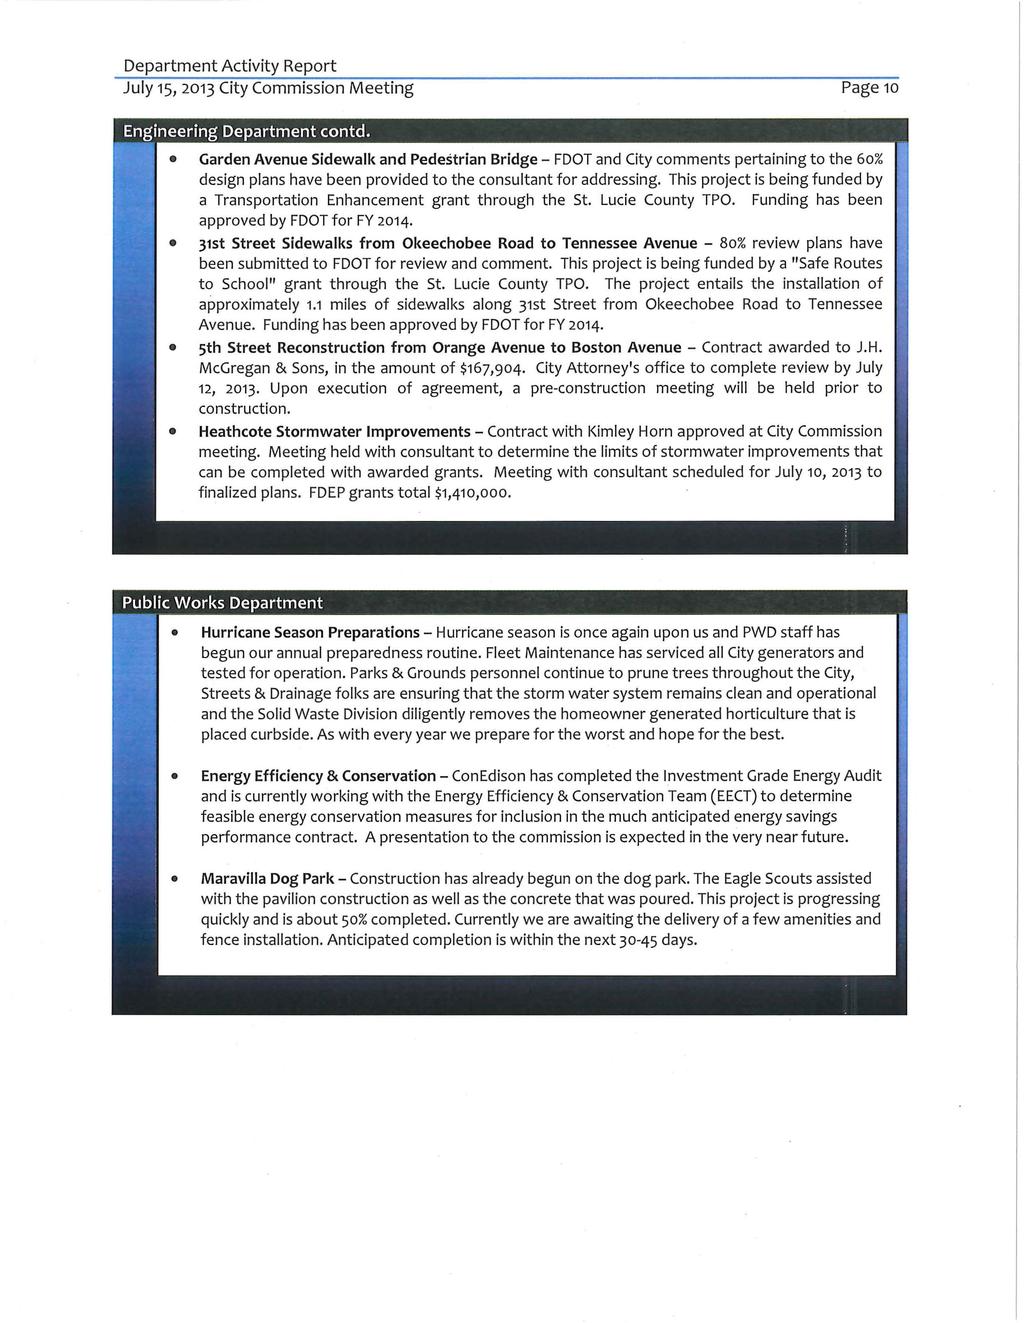 Page1o Garden Avenue Sidewalk and Pedestrian Bridge - FDOT and City comments pertaining to the 6o% design plans have been provided to the consultant for addressing.